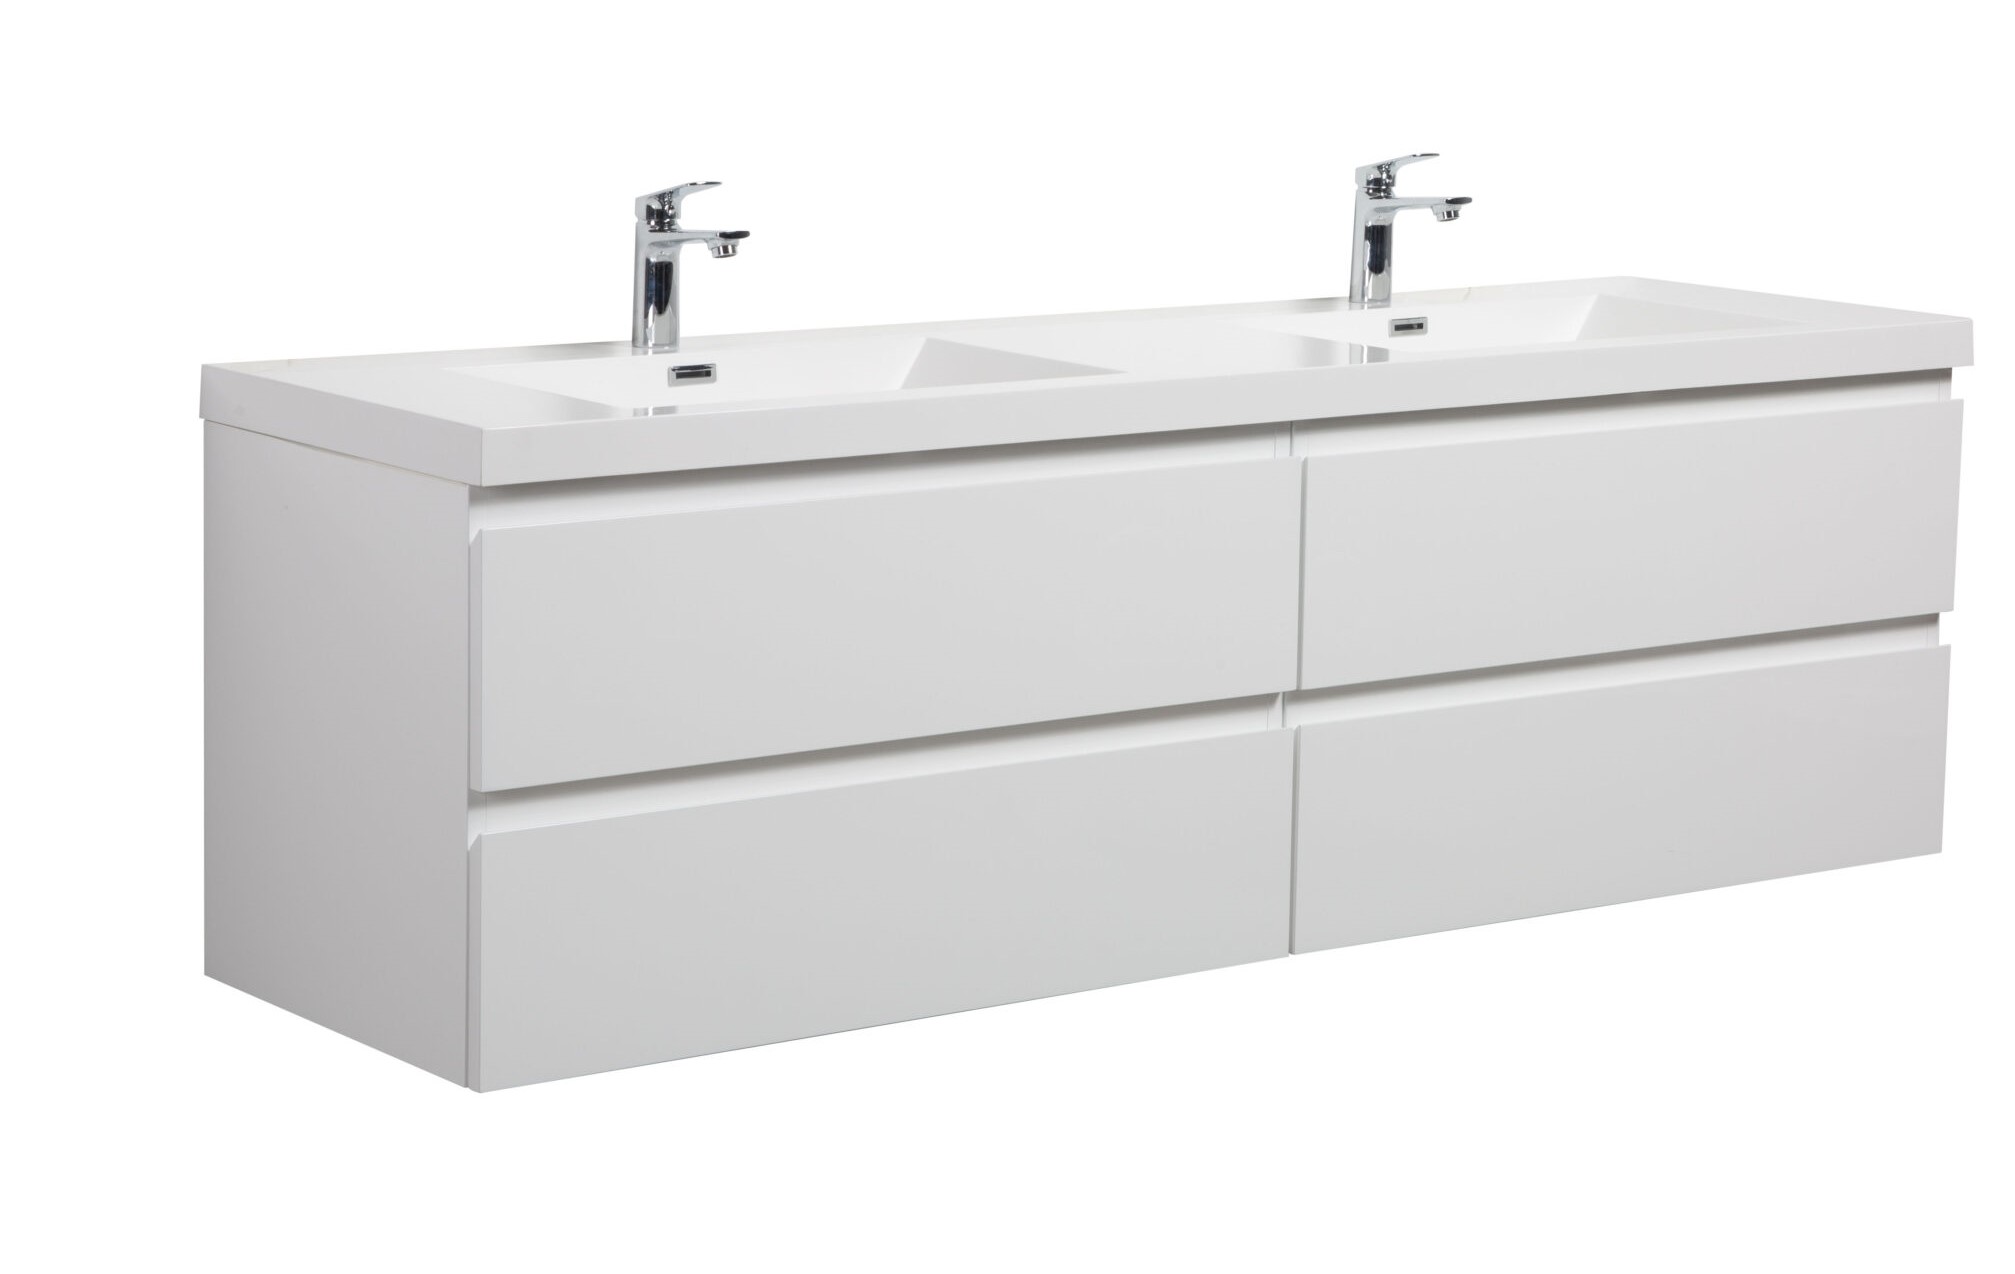 Aurora 72" Glossy Polar White Wall Hung Double Sink Bathroom Vanity with White Acrylic Countertop